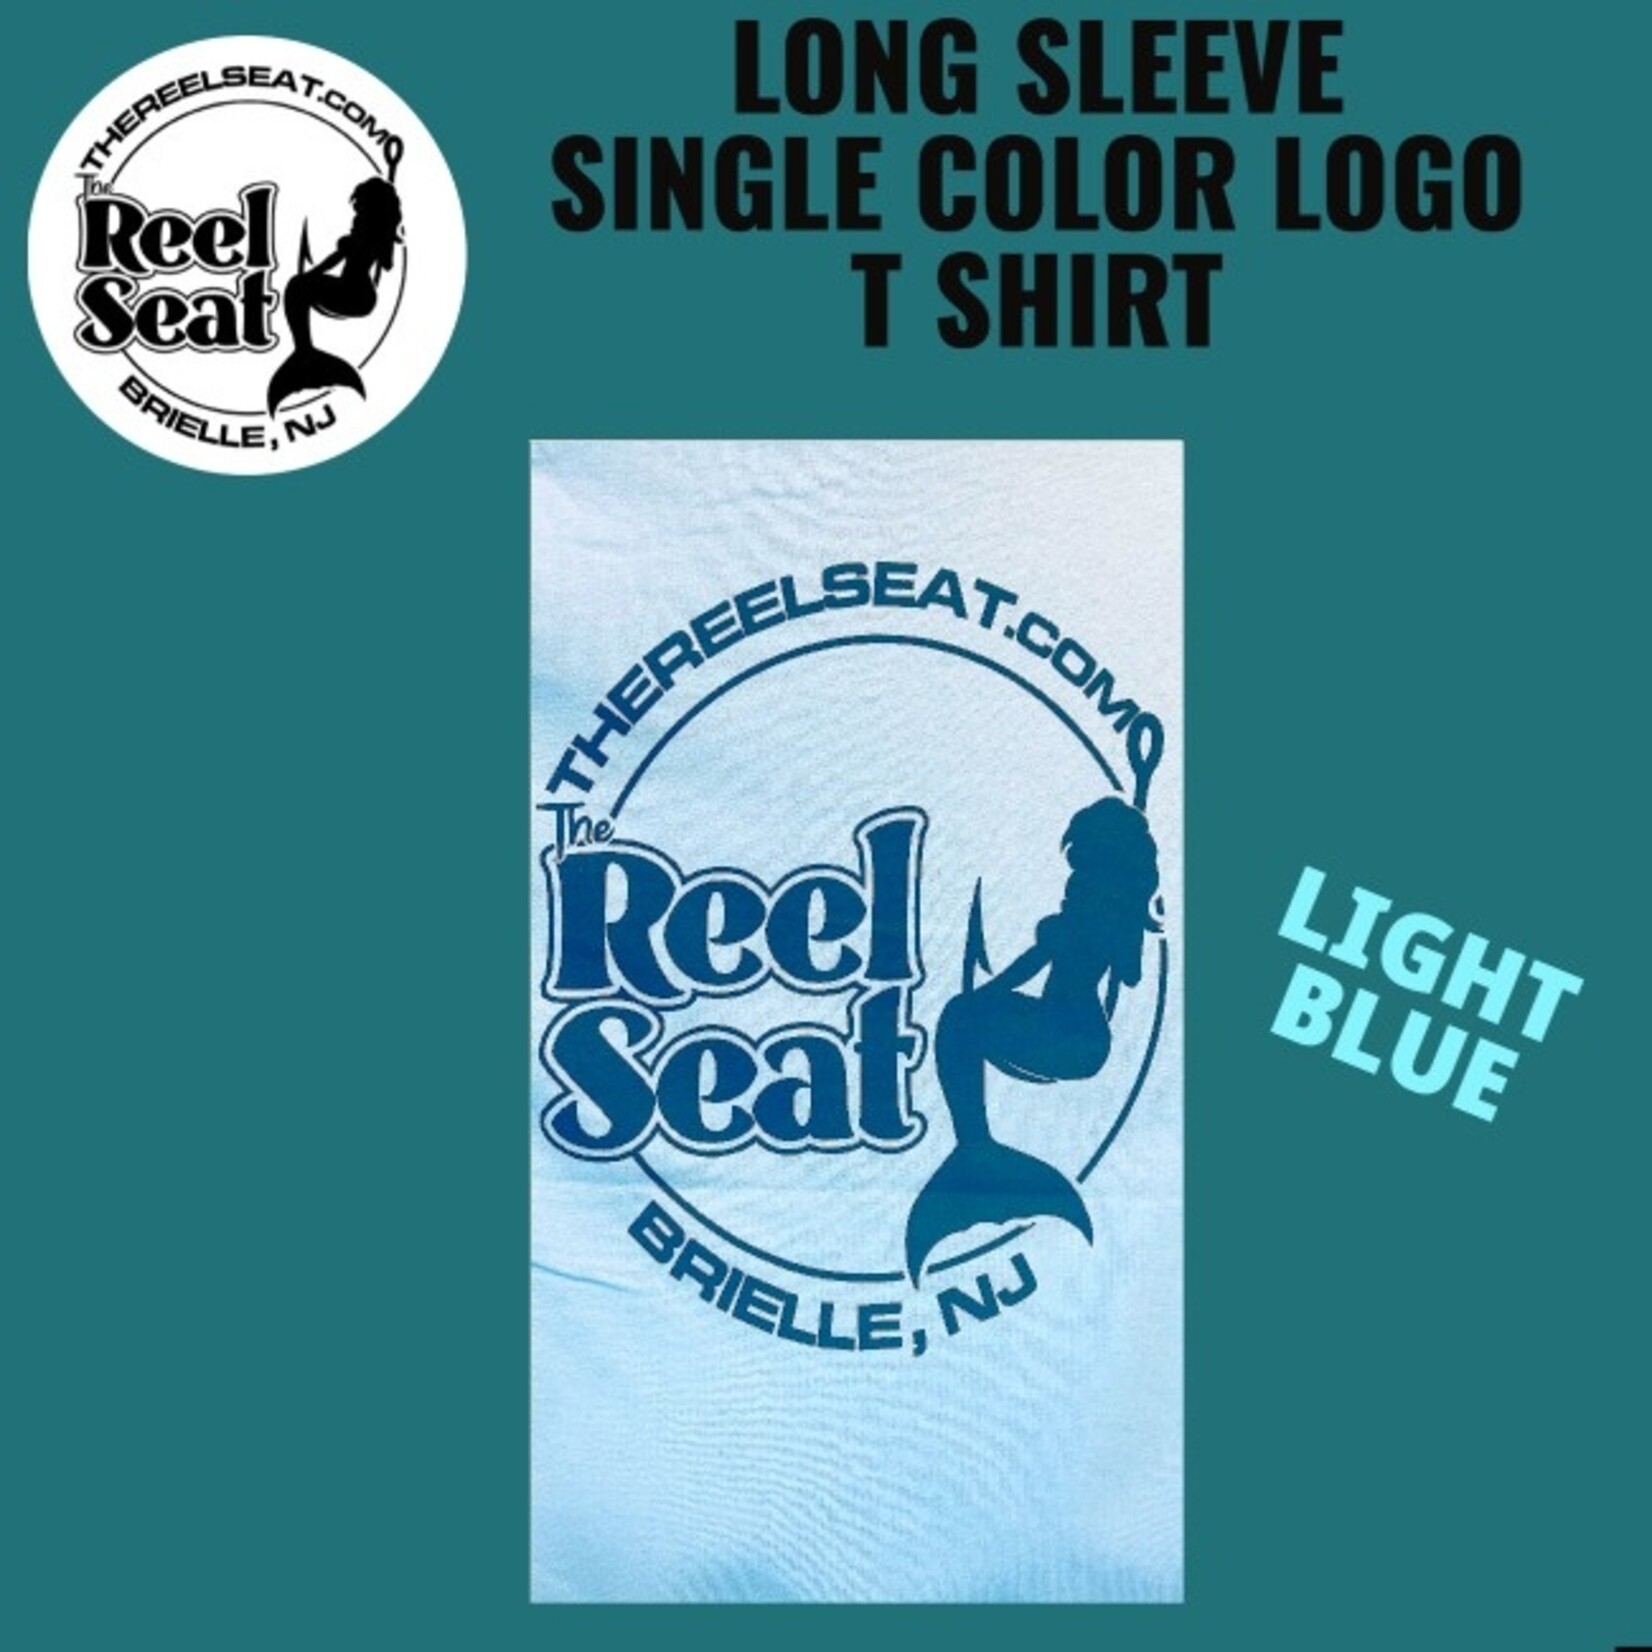 The Reel Seat RS SINGLE COLOR LOGO T SHIRT LONG SLEEVE